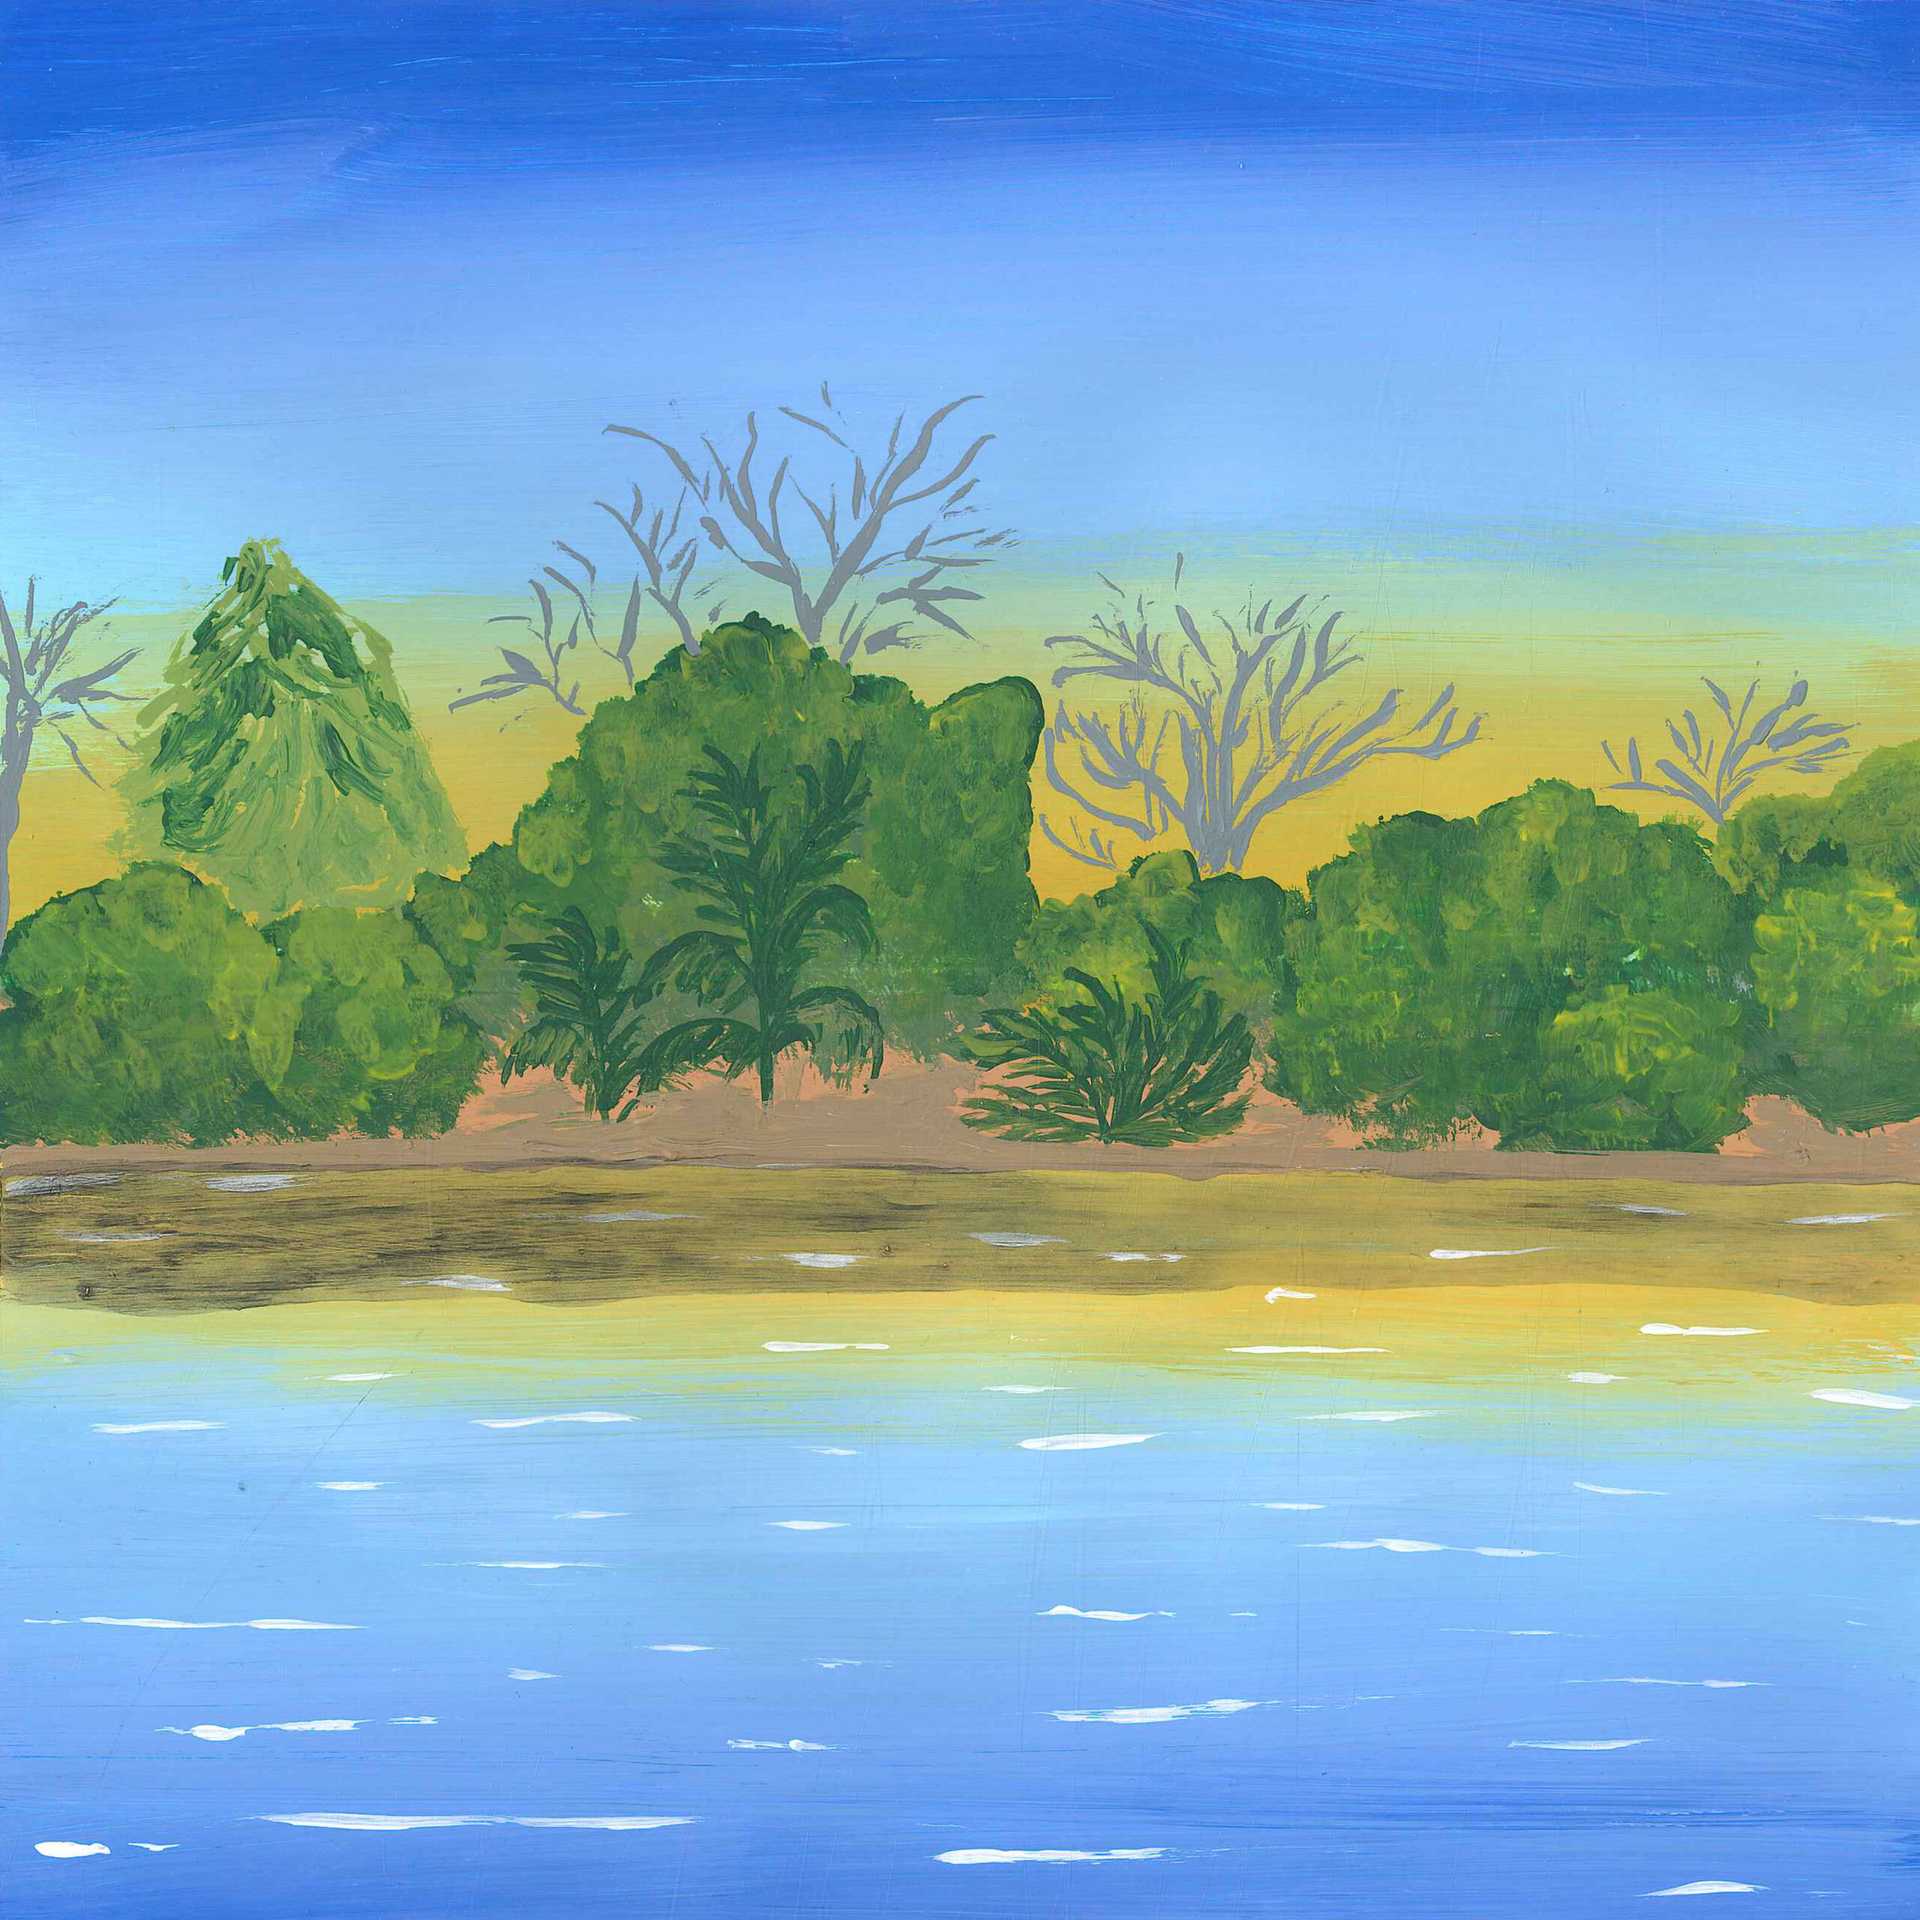 Dusk on the river Gambie - nature landscape painting - earth.fm